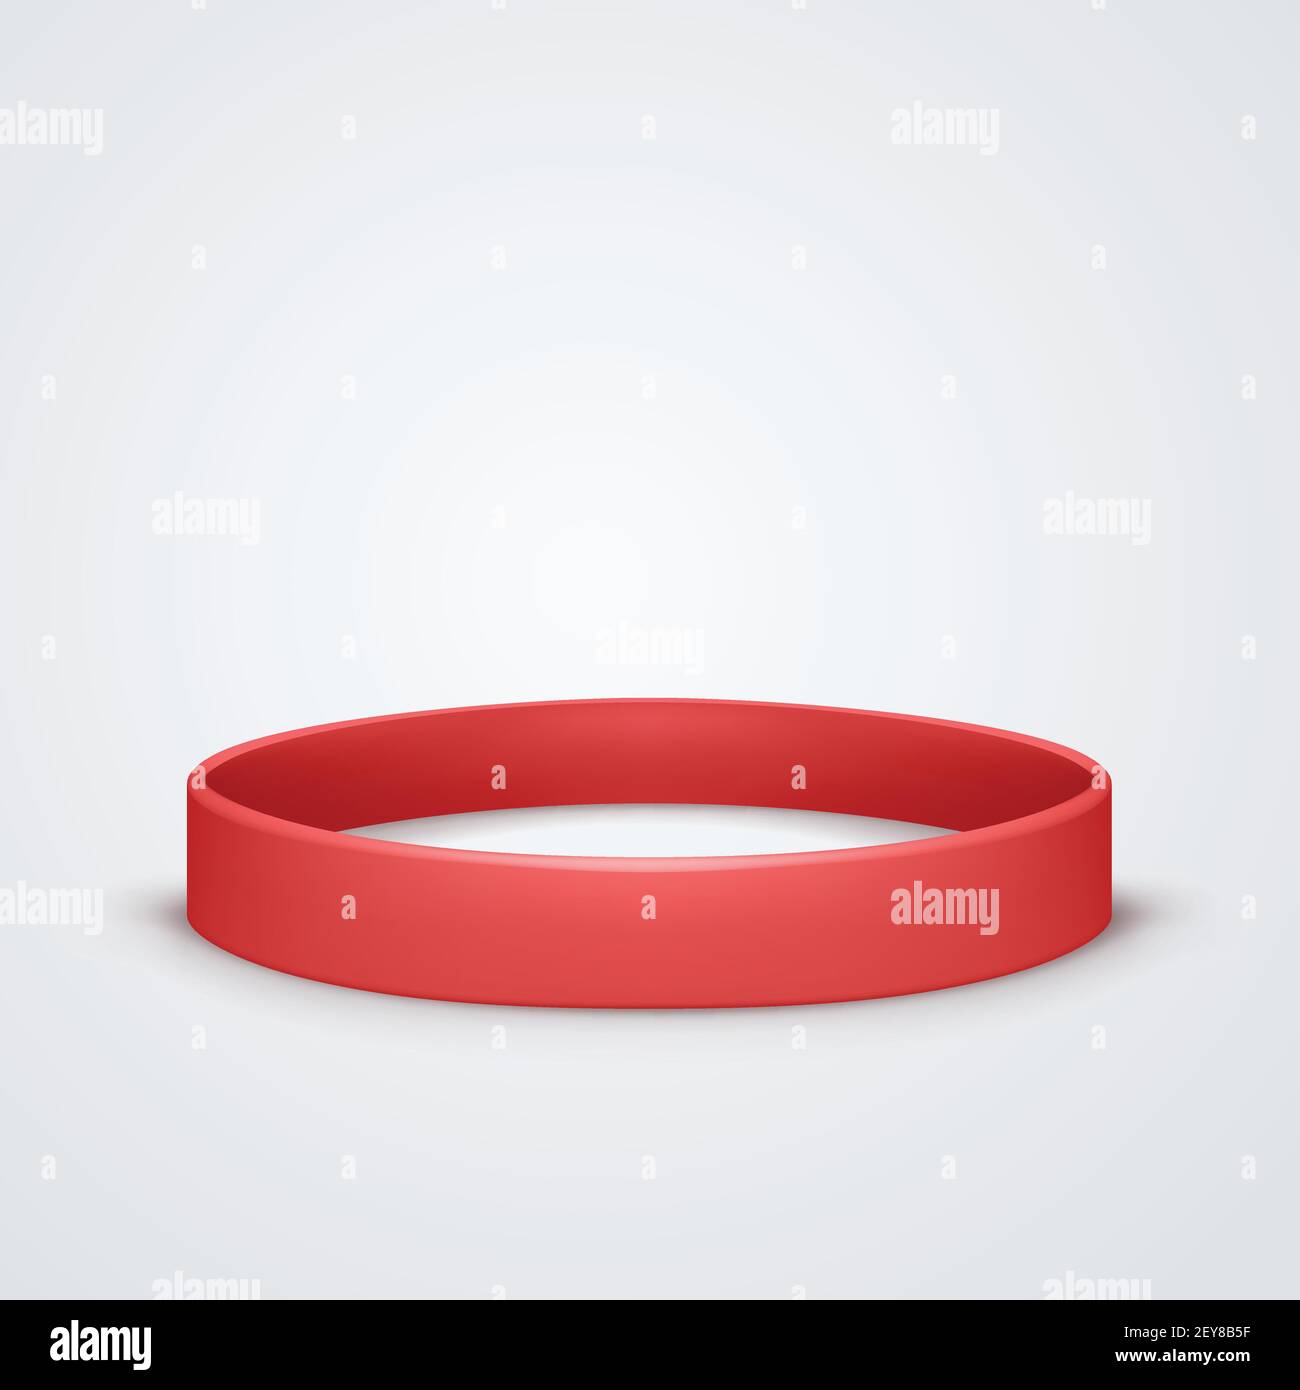 Red rubber bands isolated on white Stock Photo by ©CreativeFamily 161026098